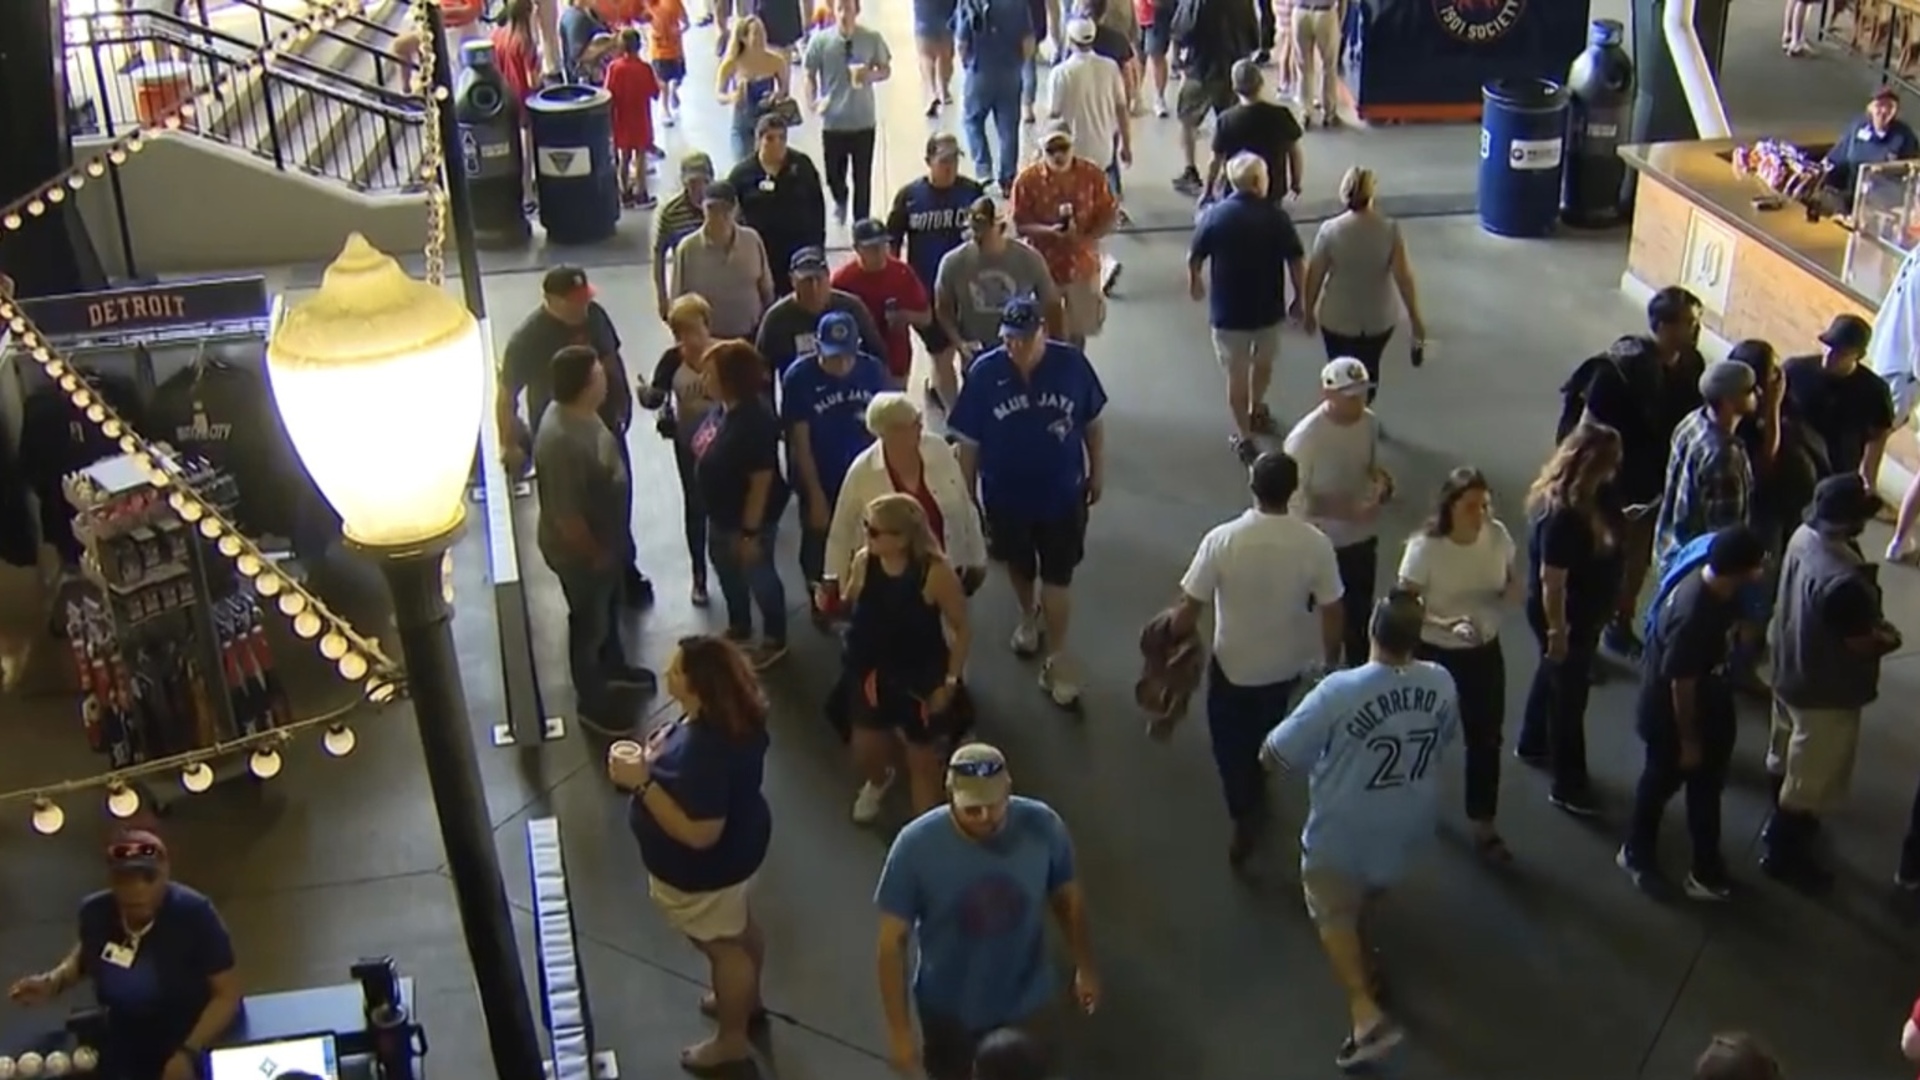 Canadian Invasion: Jays fans flock to Detroit for Tigers series